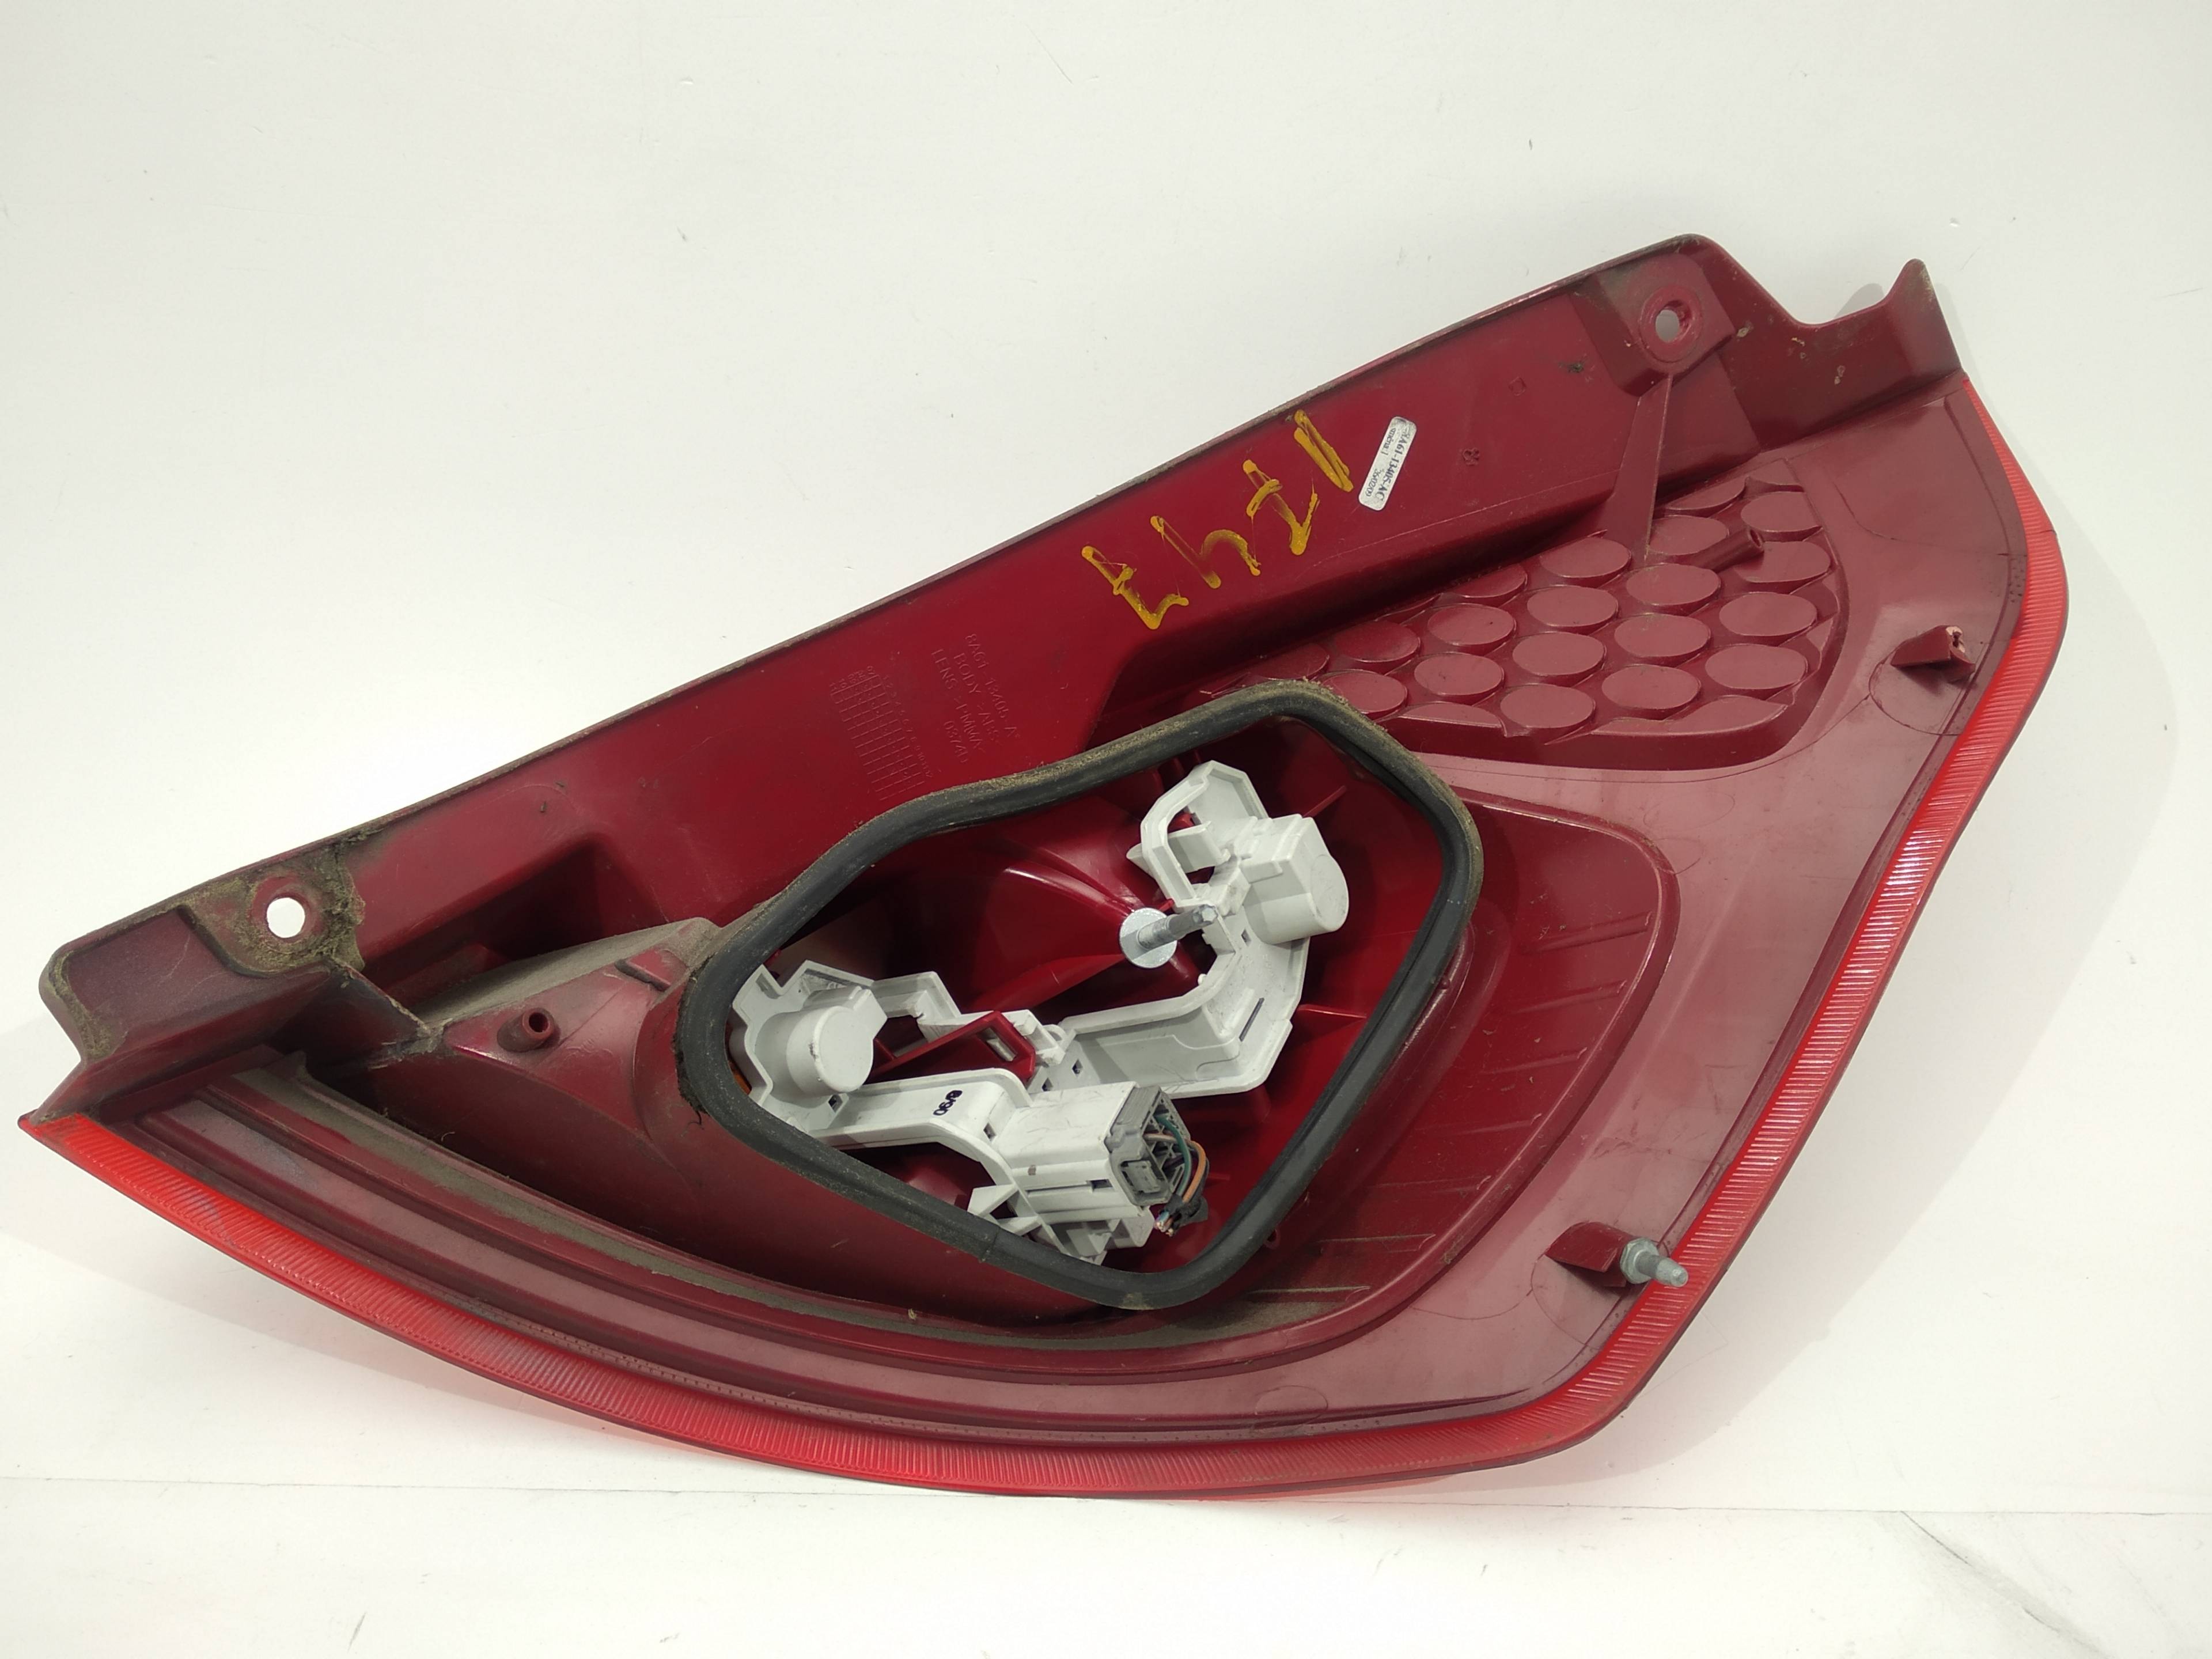 FORD Fiesta 5 generation (2001-2010) Rear Left Taillight 8A6113405A, 8A6113405A, 8A6113405A 19311478